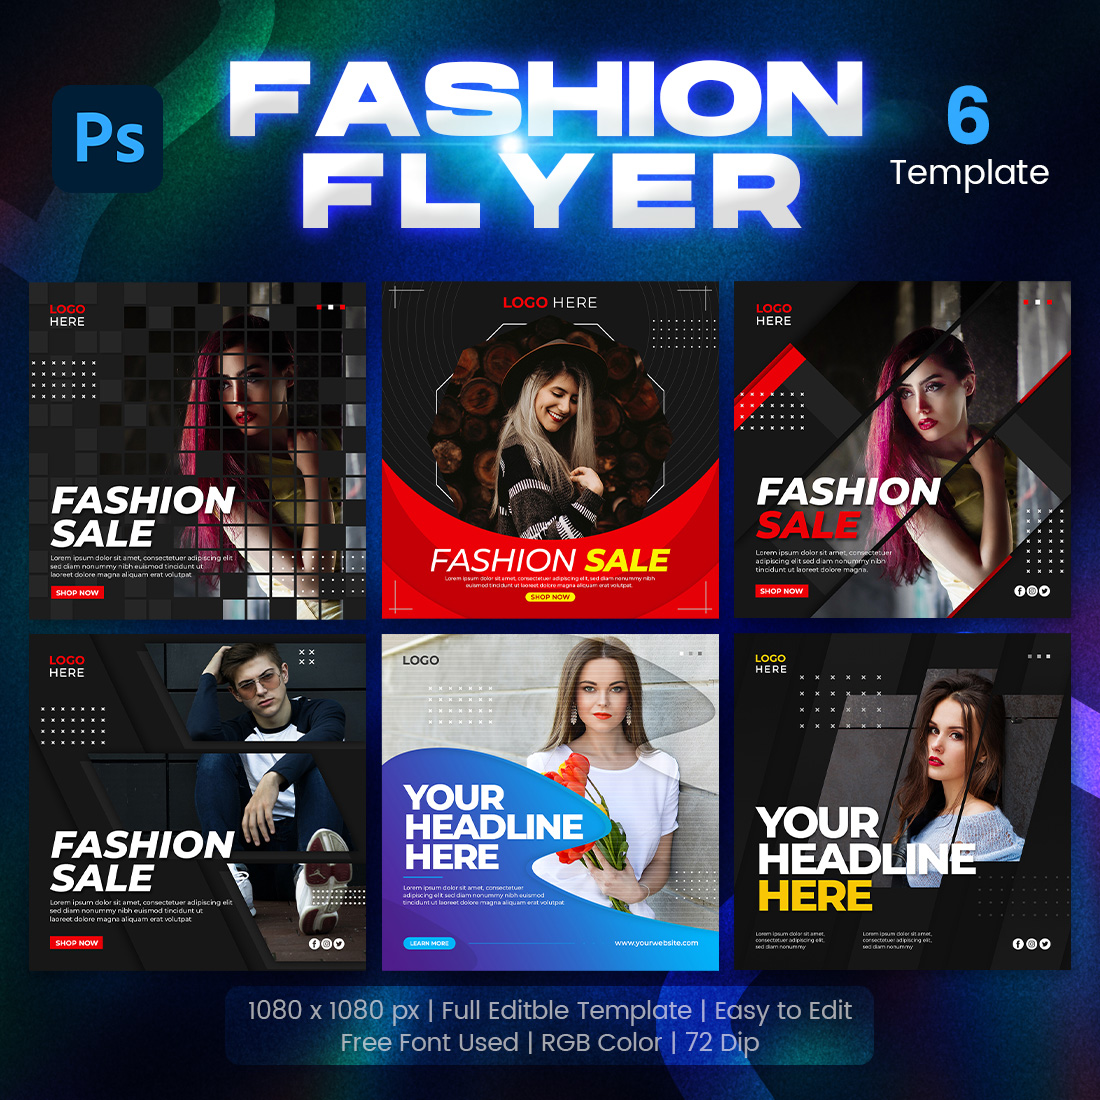 Fashion Sale Promotion Banner or Square Flyer 6 Set Template main cover.